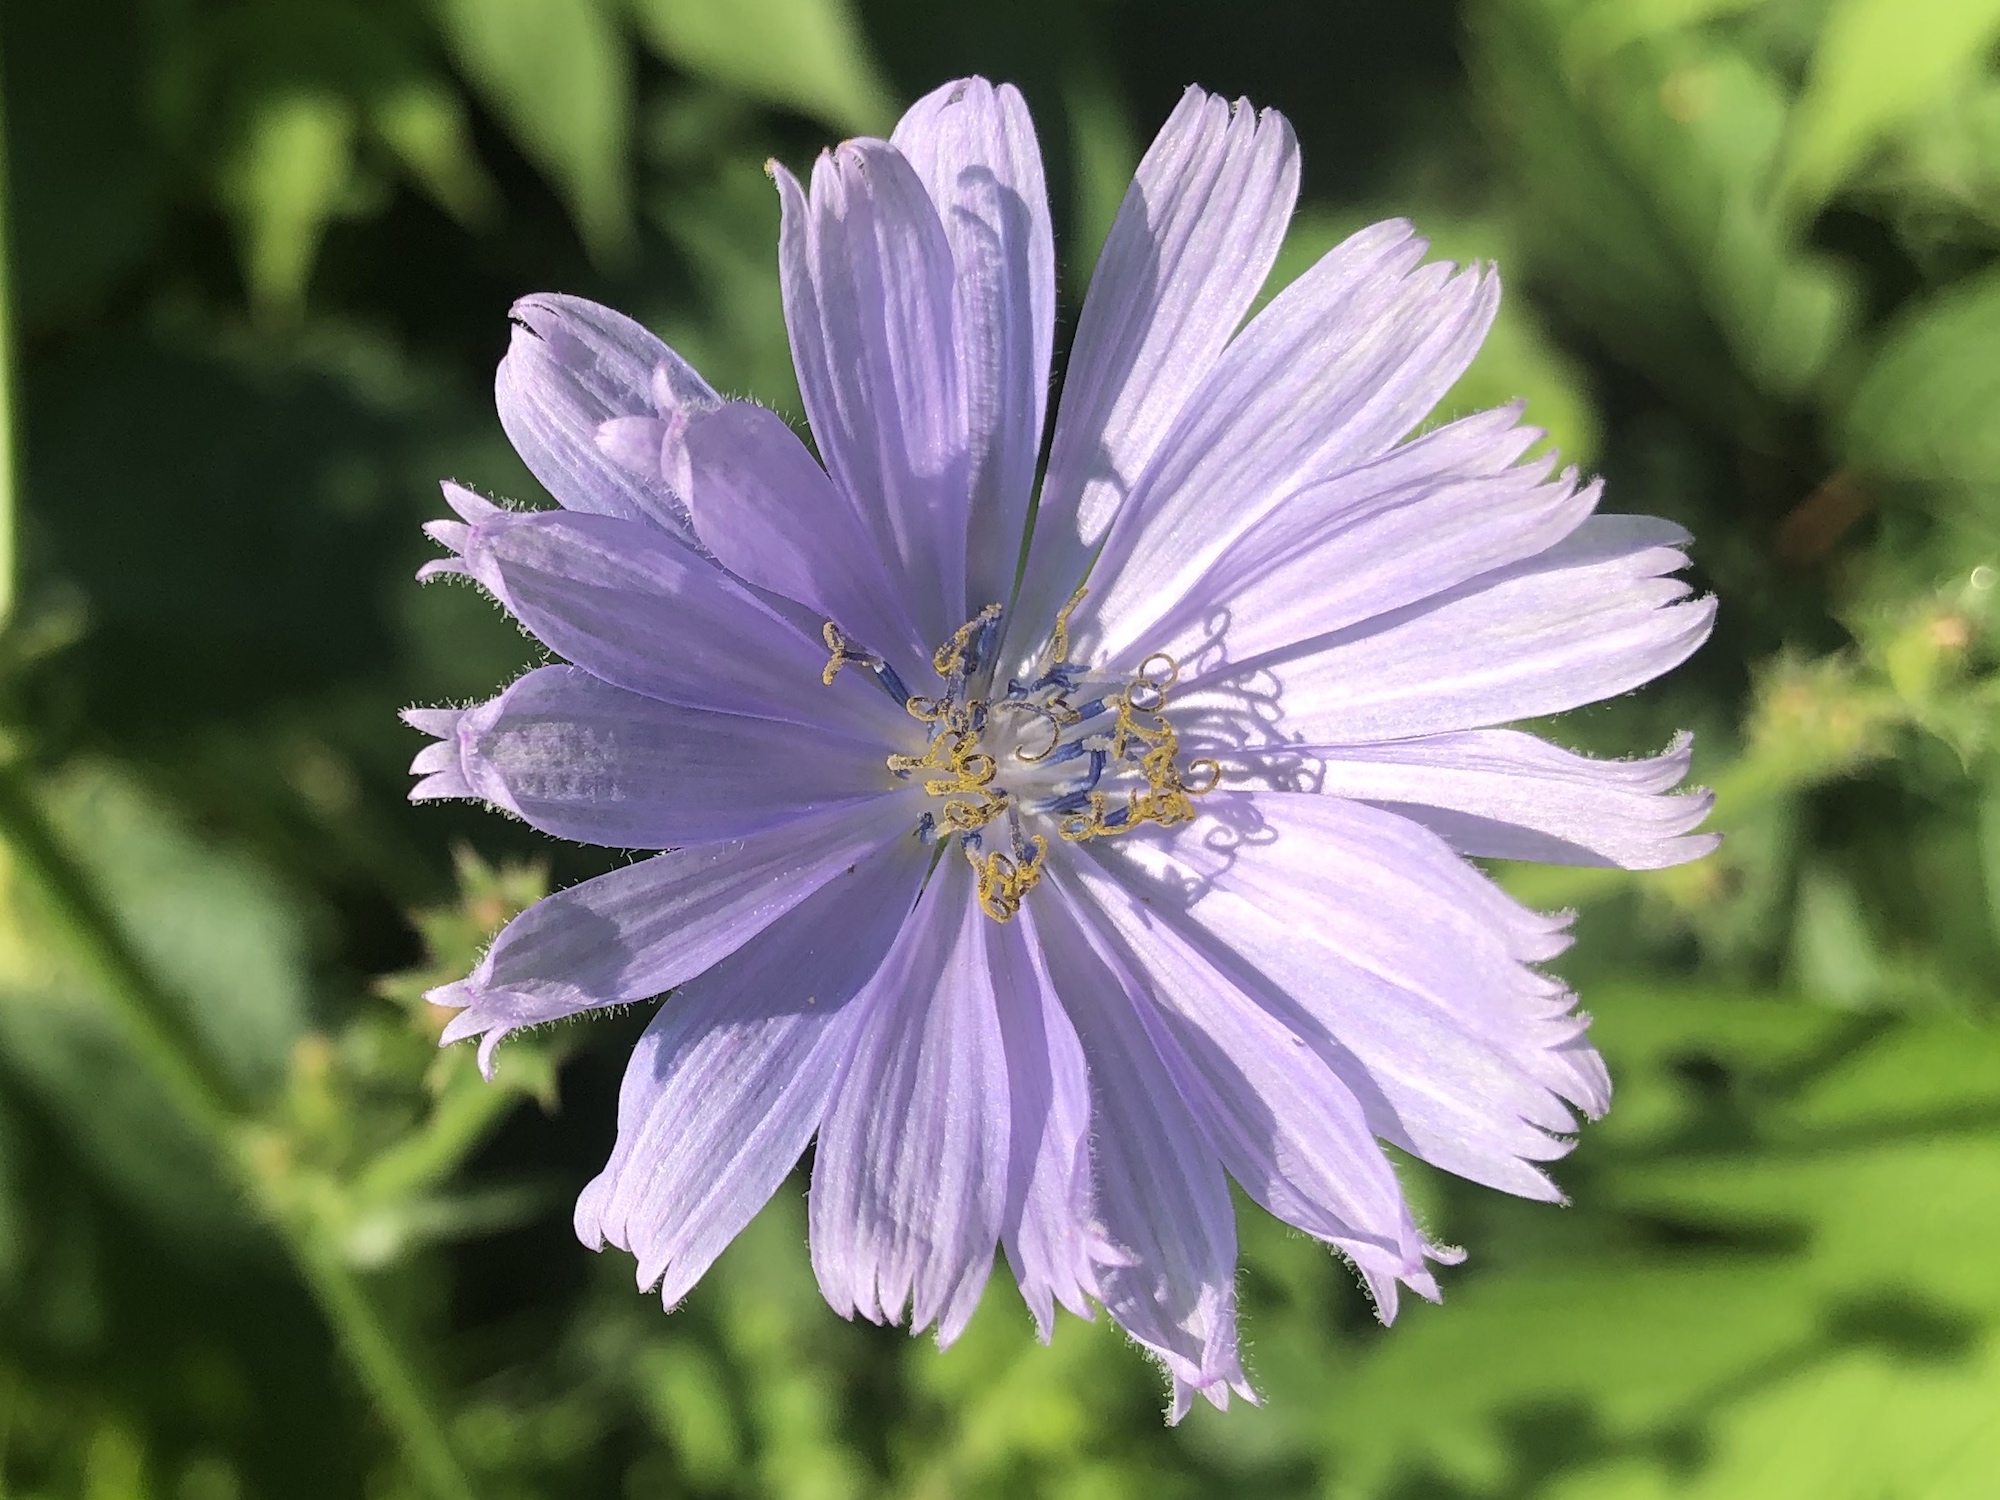 Chicory in Marion Dunn Prairie in Madison, Wisconsin on July 4, 2020.